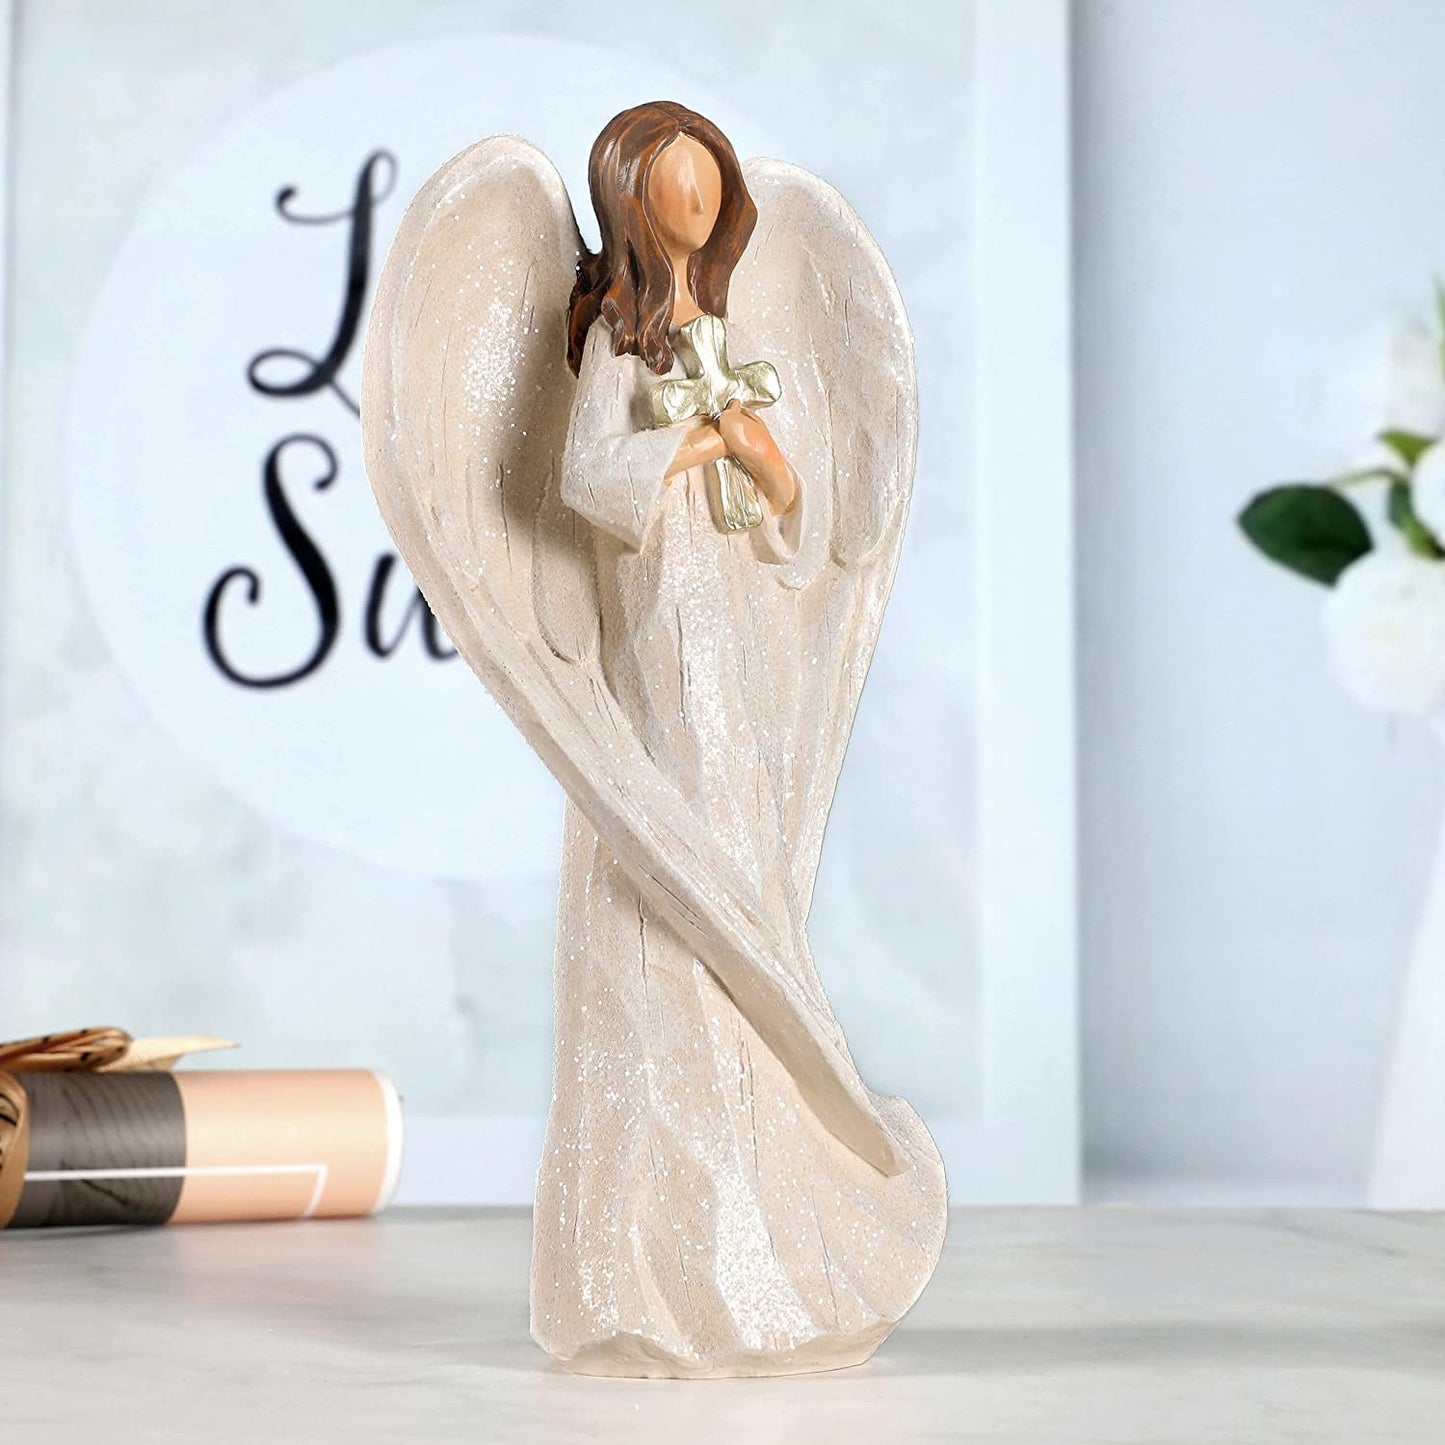 Hodao 8.9inch Resin Praying Angel Figurines for Gifts Home Decorations(Holding the cross)